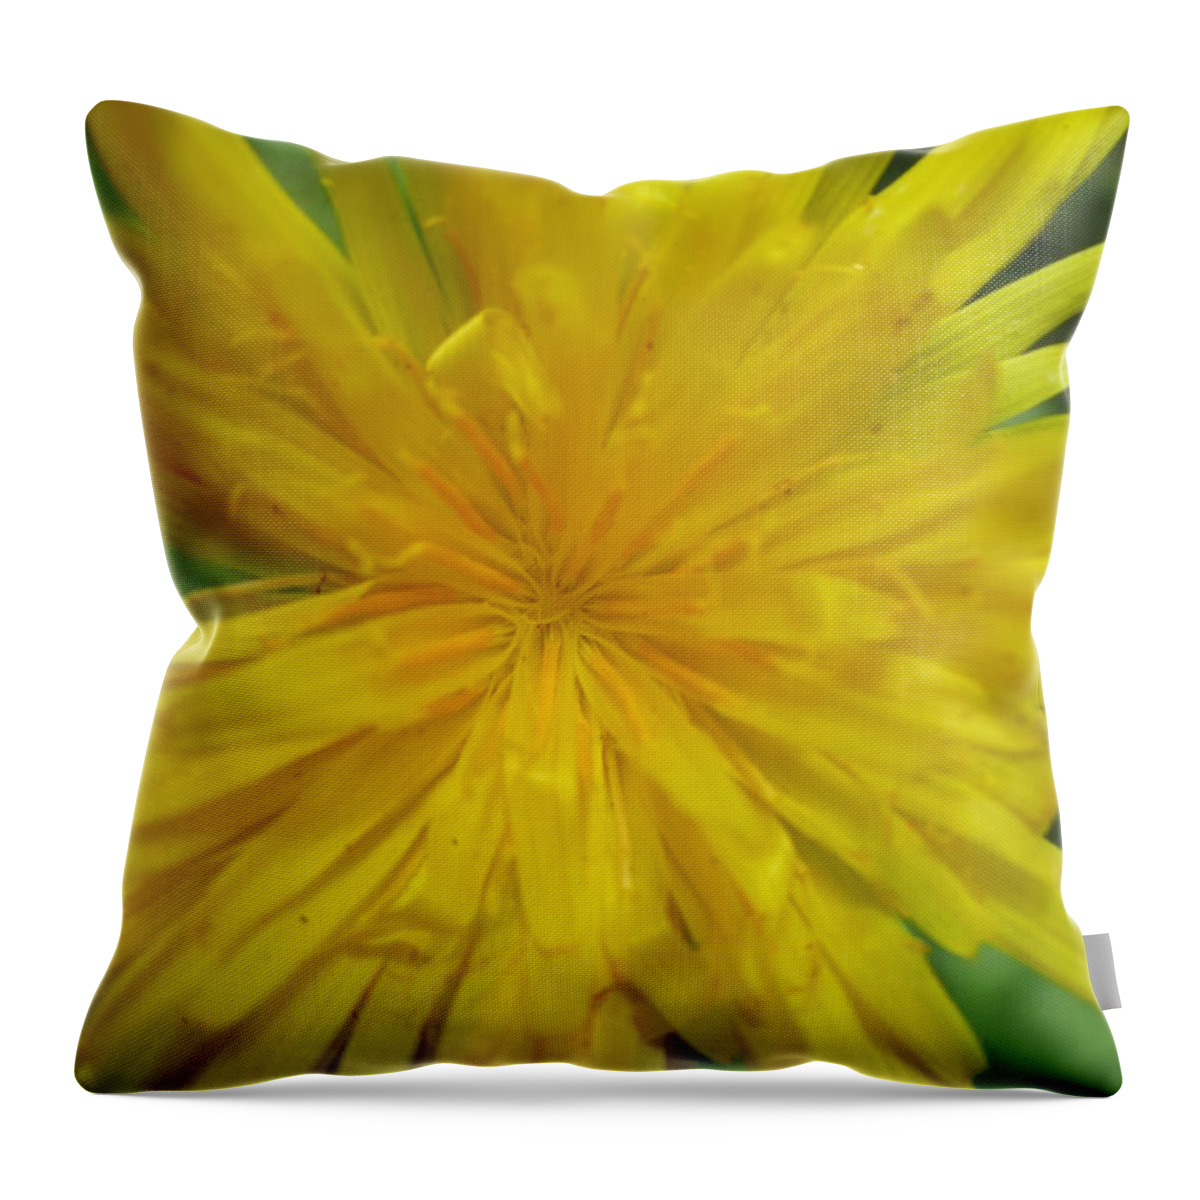 Dandelion Throw Pillow featuring the photograph Dandelion Close Up by Kym Backland